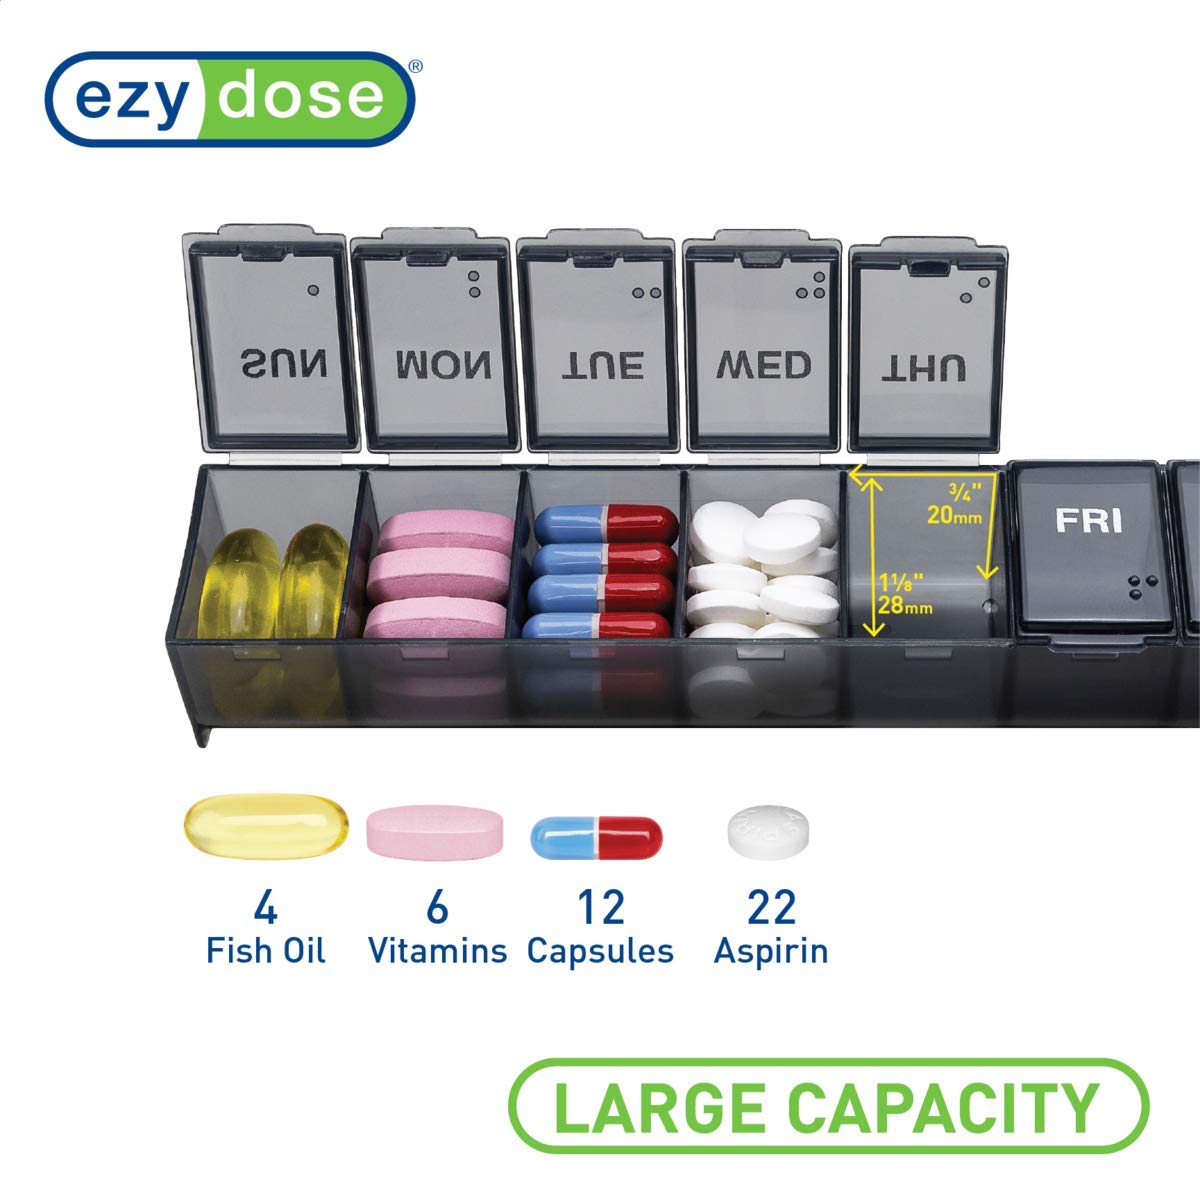 EZY DOSE Weekly (7-Day) Pill Organizer, Vitamin Planner, And Medicine Box, Large Compartments, Black, Made in The USA